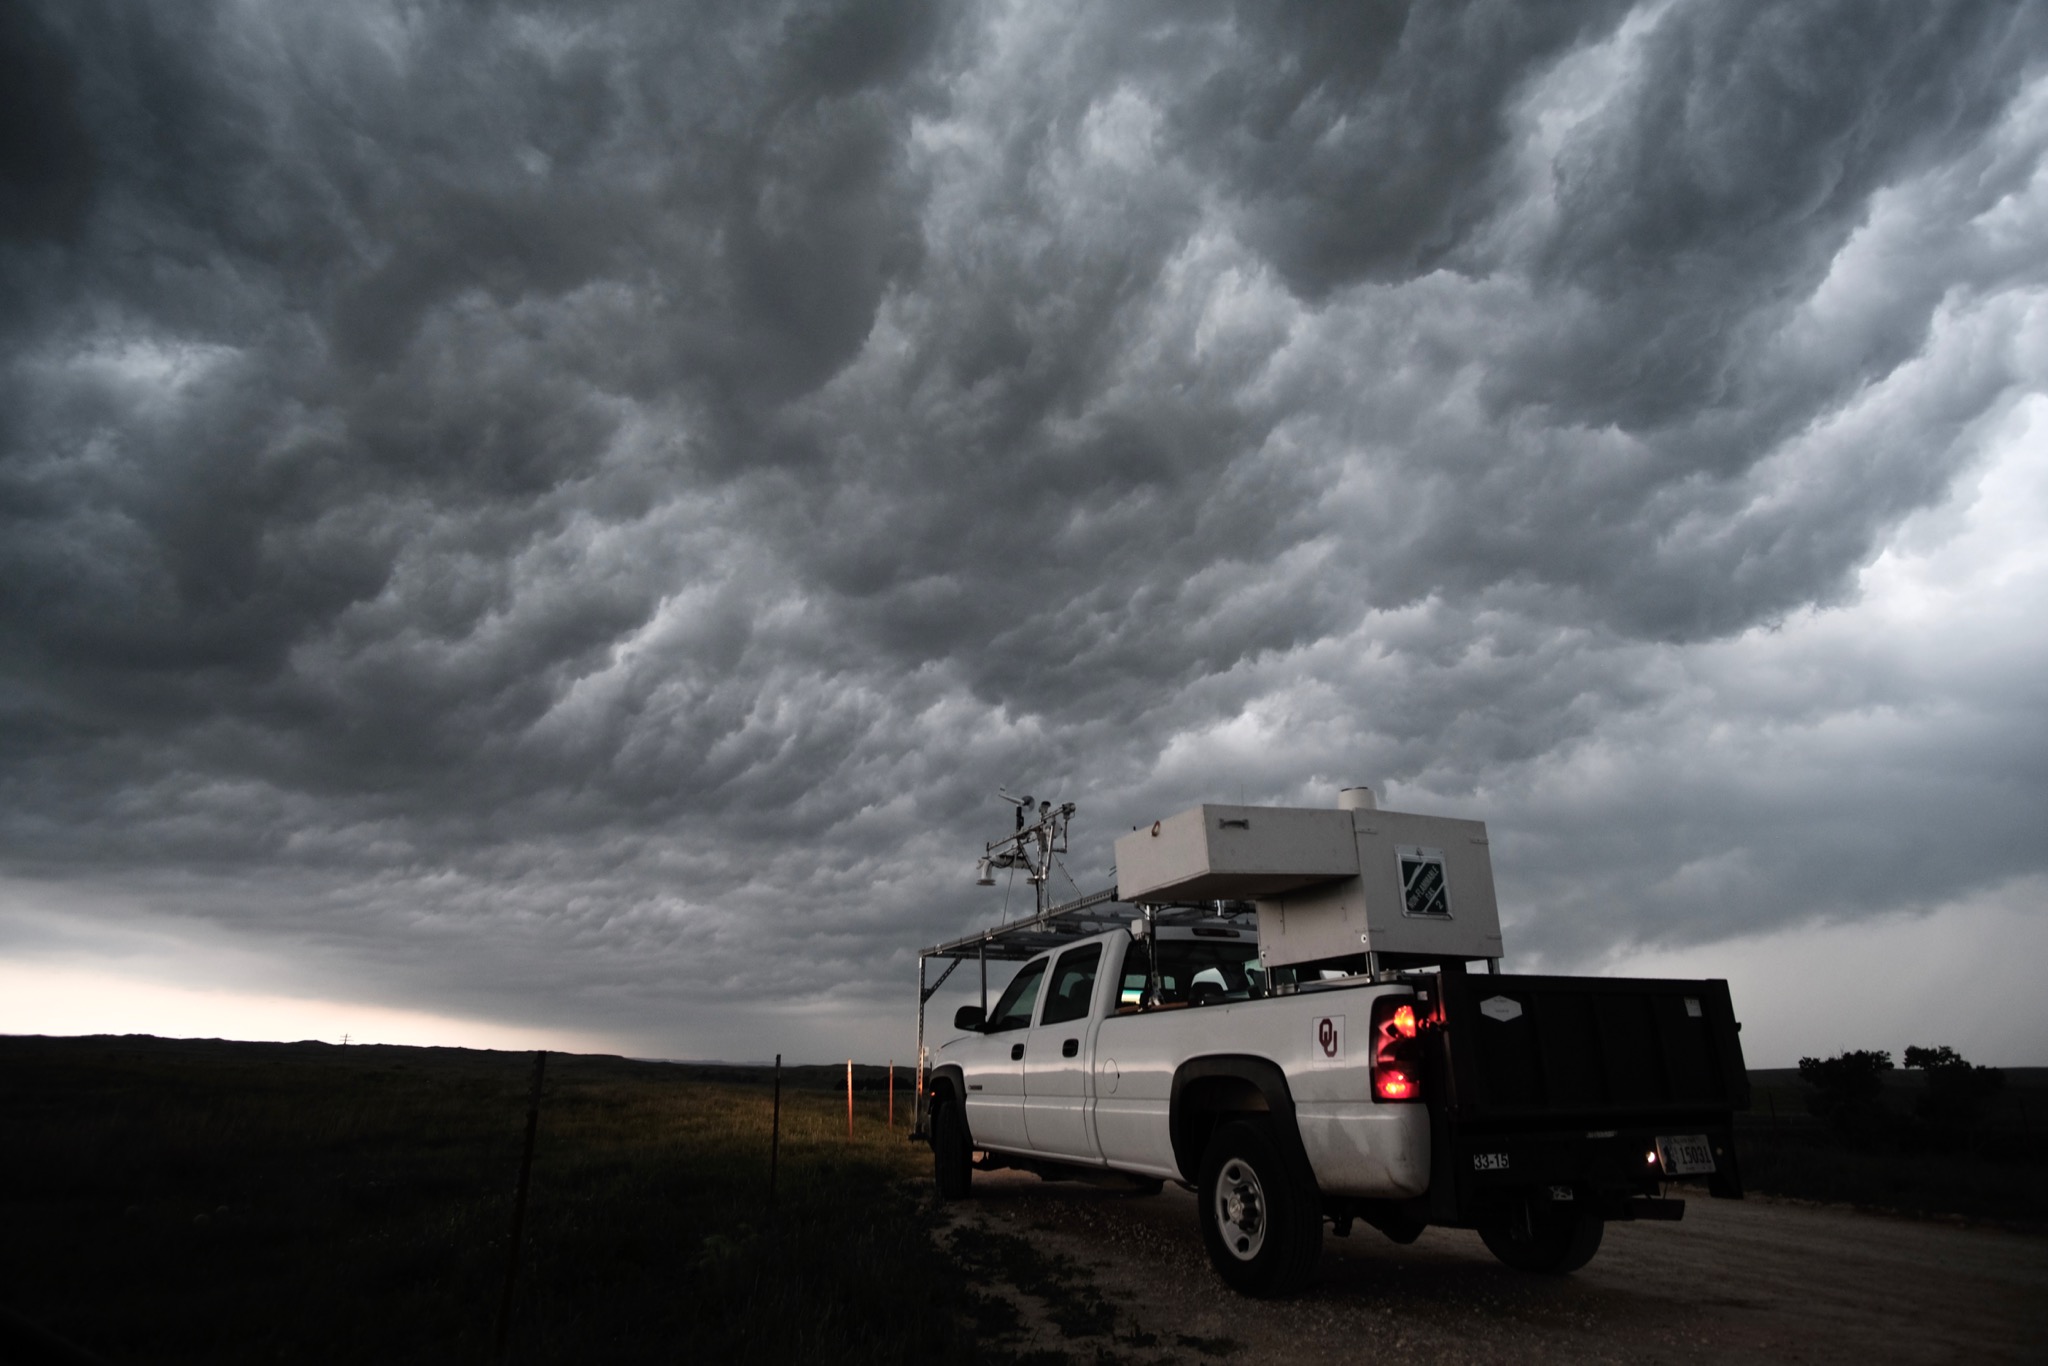 The LiDAR system pick-up truck in front of a storm.